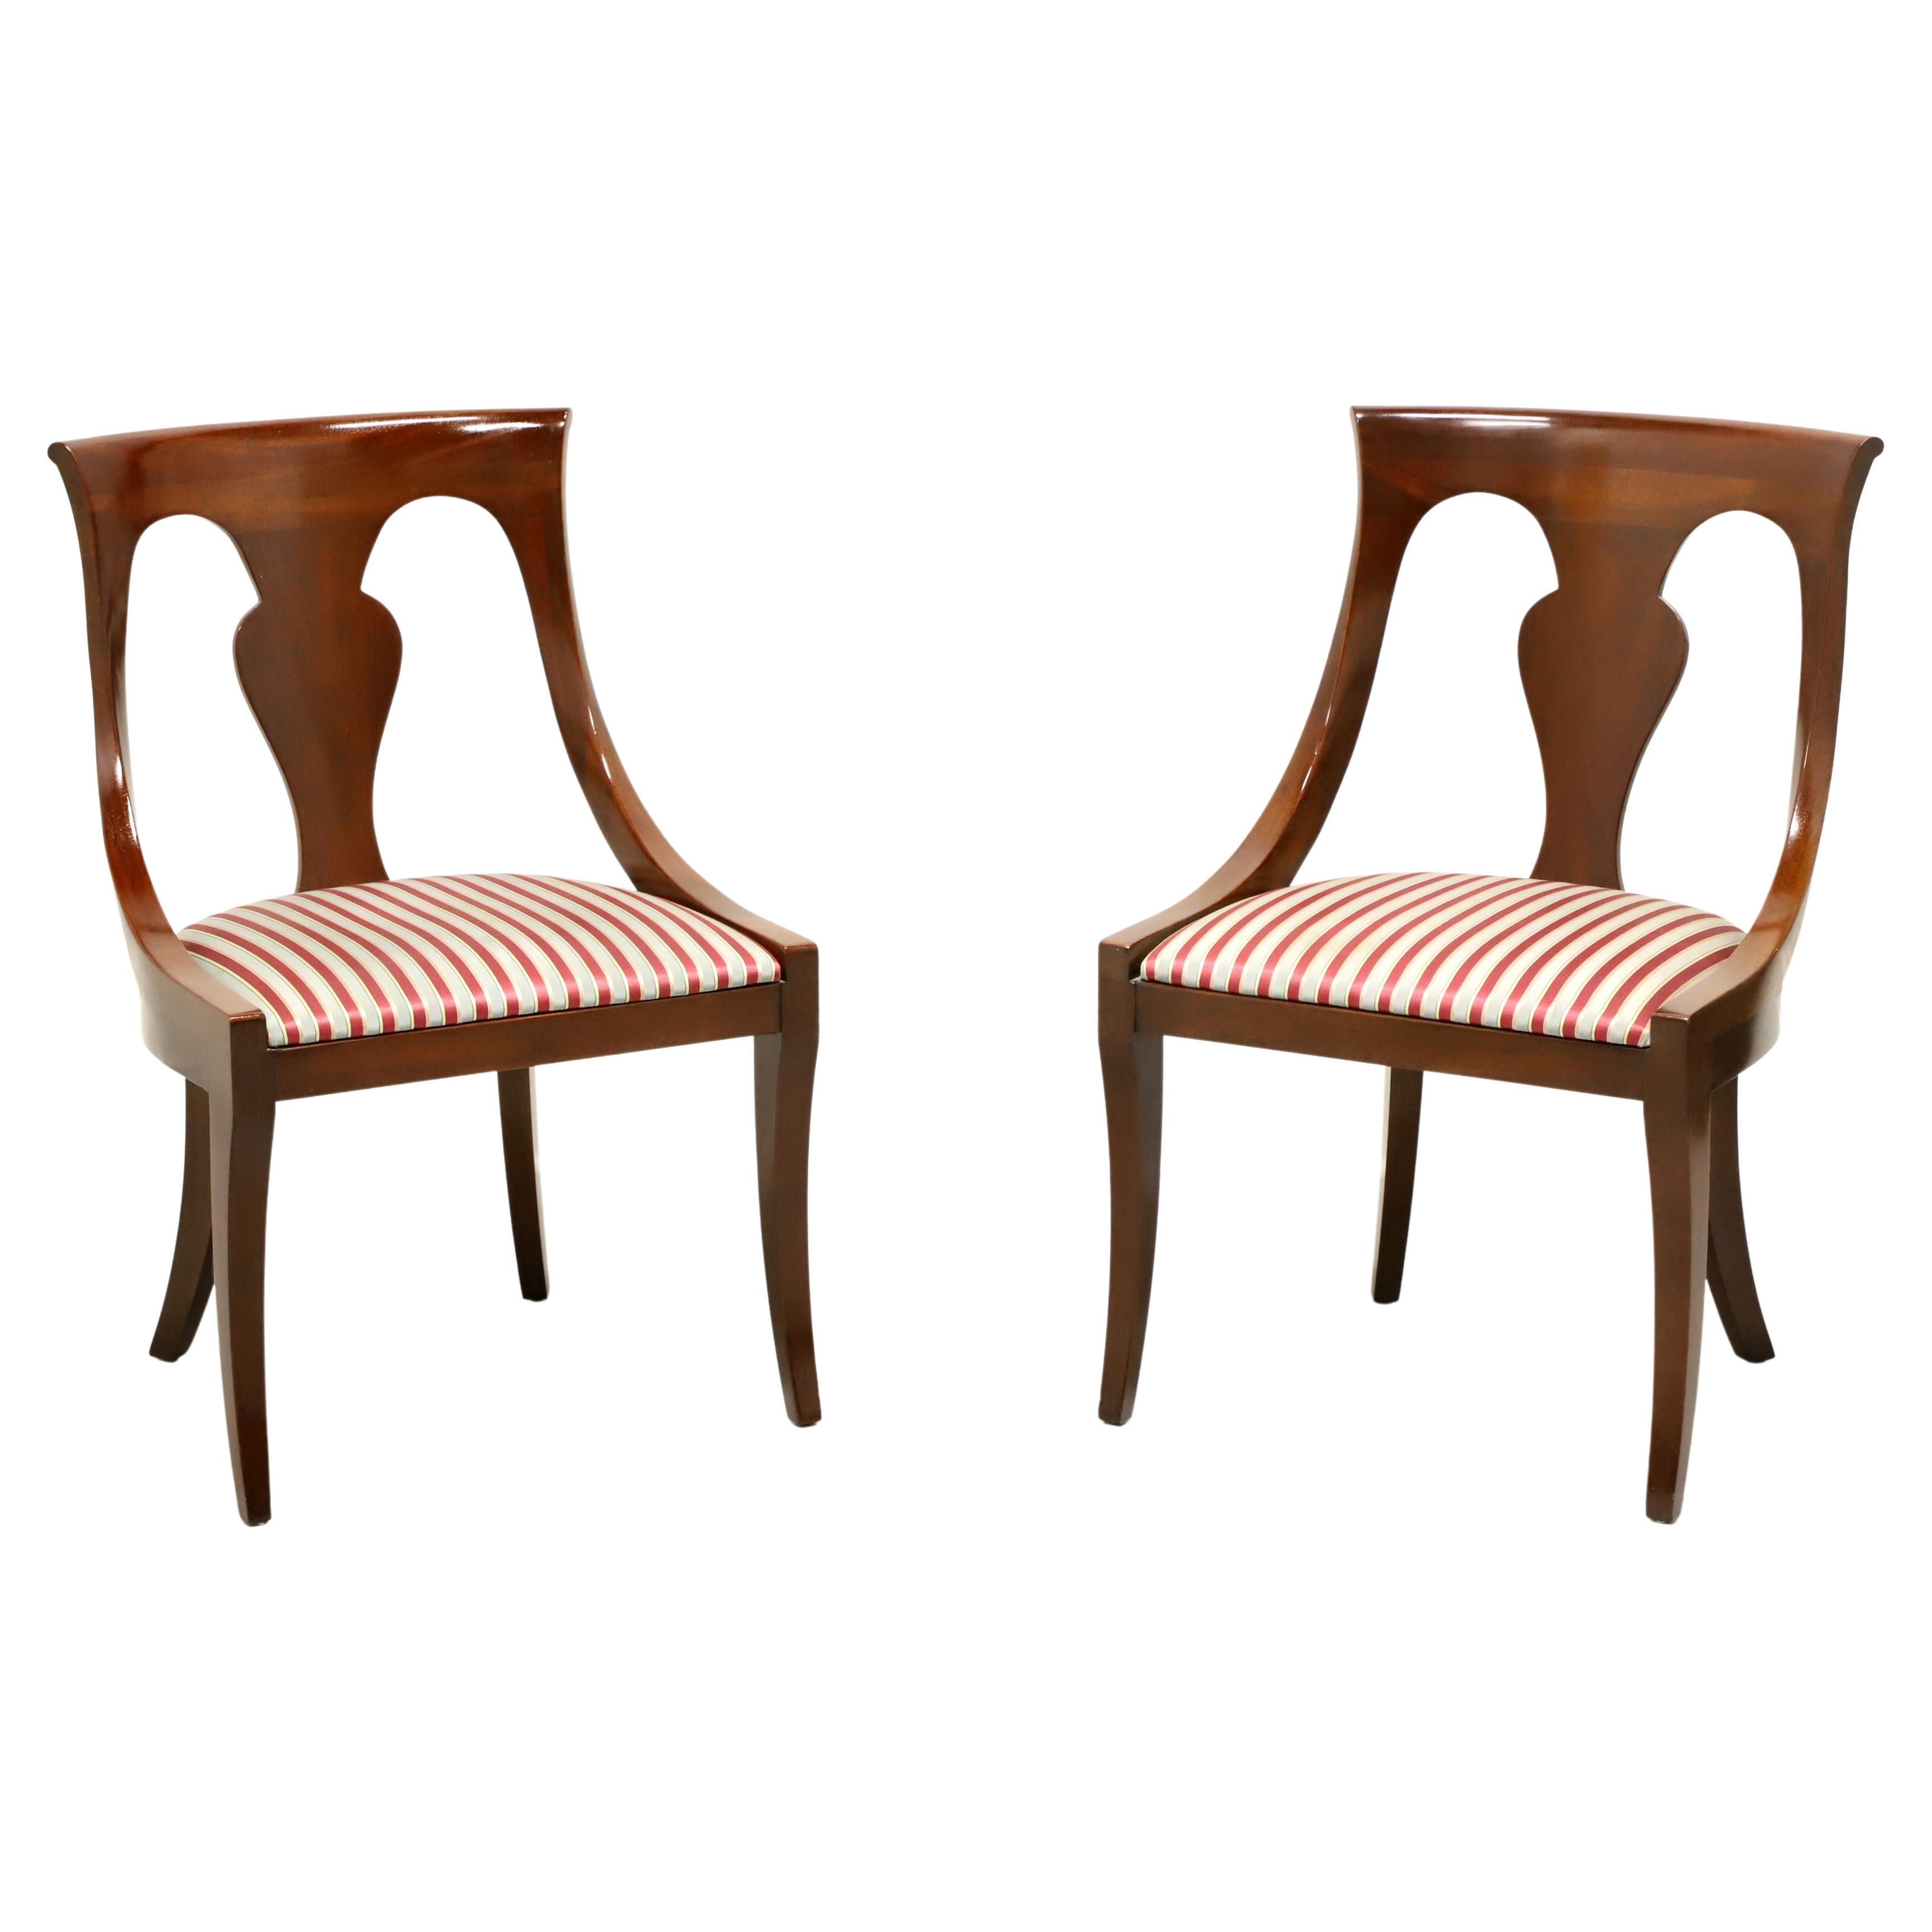 DREXEL HERITAGE Mahogany Empire Style Dining Side Chairs - Pair A